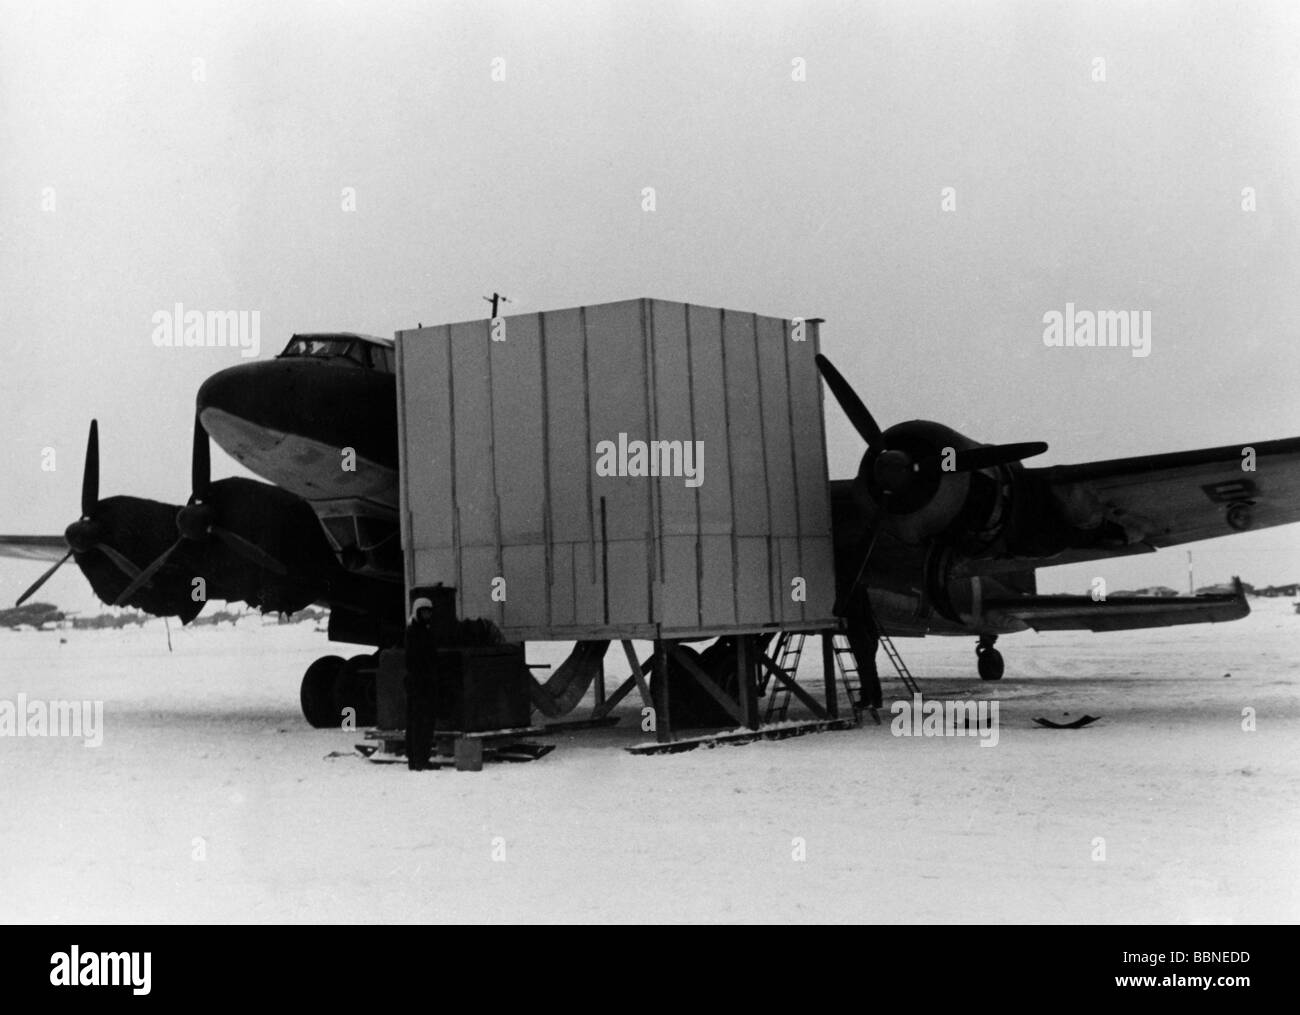 events, Second World War / WWII, aerial warfare, aircraft, German transport and reconnaissance aircraft Focke-Wulf Fw 200 'Condor', Stalino, Ukraine, 11.2.1943, engines are being maintained, protection against cold for working ground personnel, Stock Photo